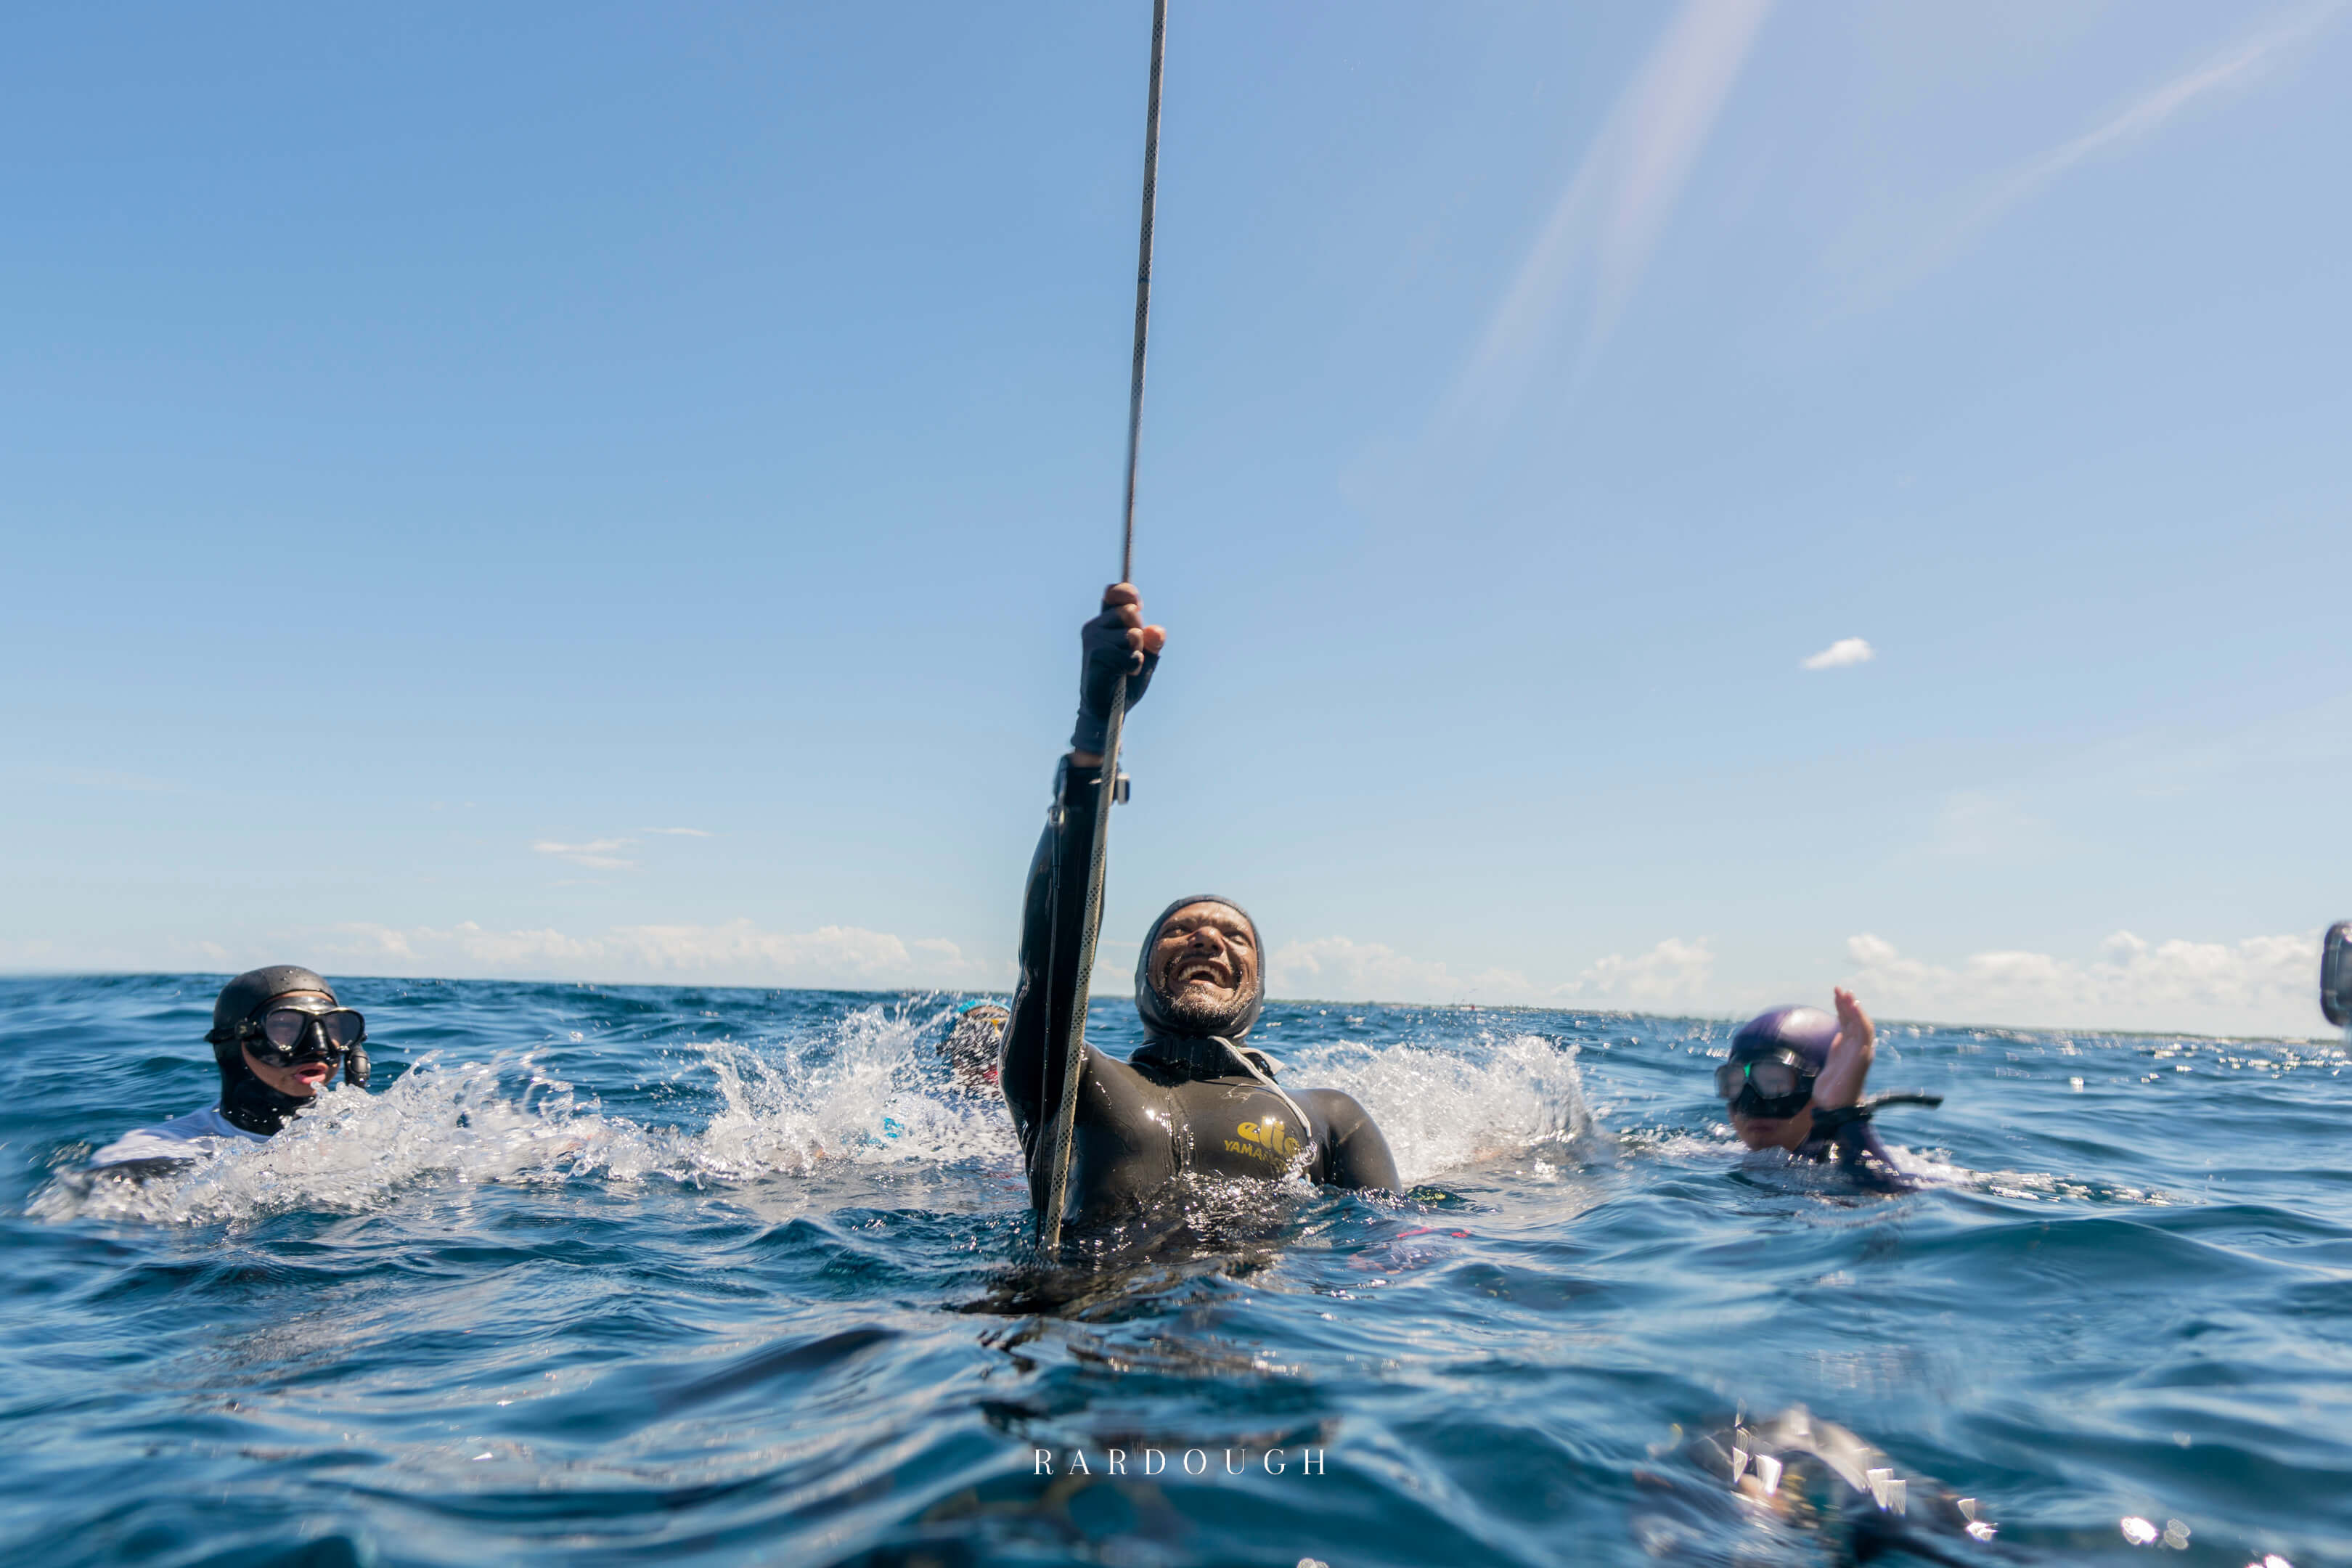 Umair Badheeu Shatters National Freediving Record with a Mesmerizing Dive in the Philippines